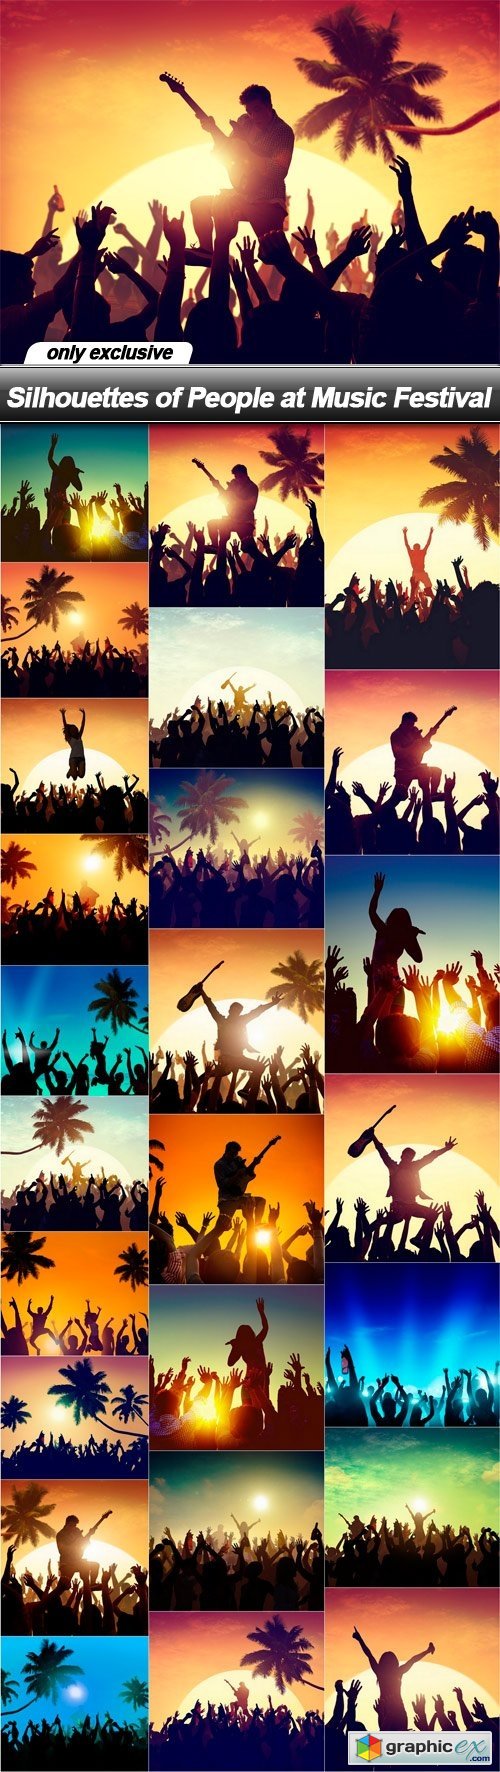 Silhouettes of People at Music Festival - 25 UHQ JPEG